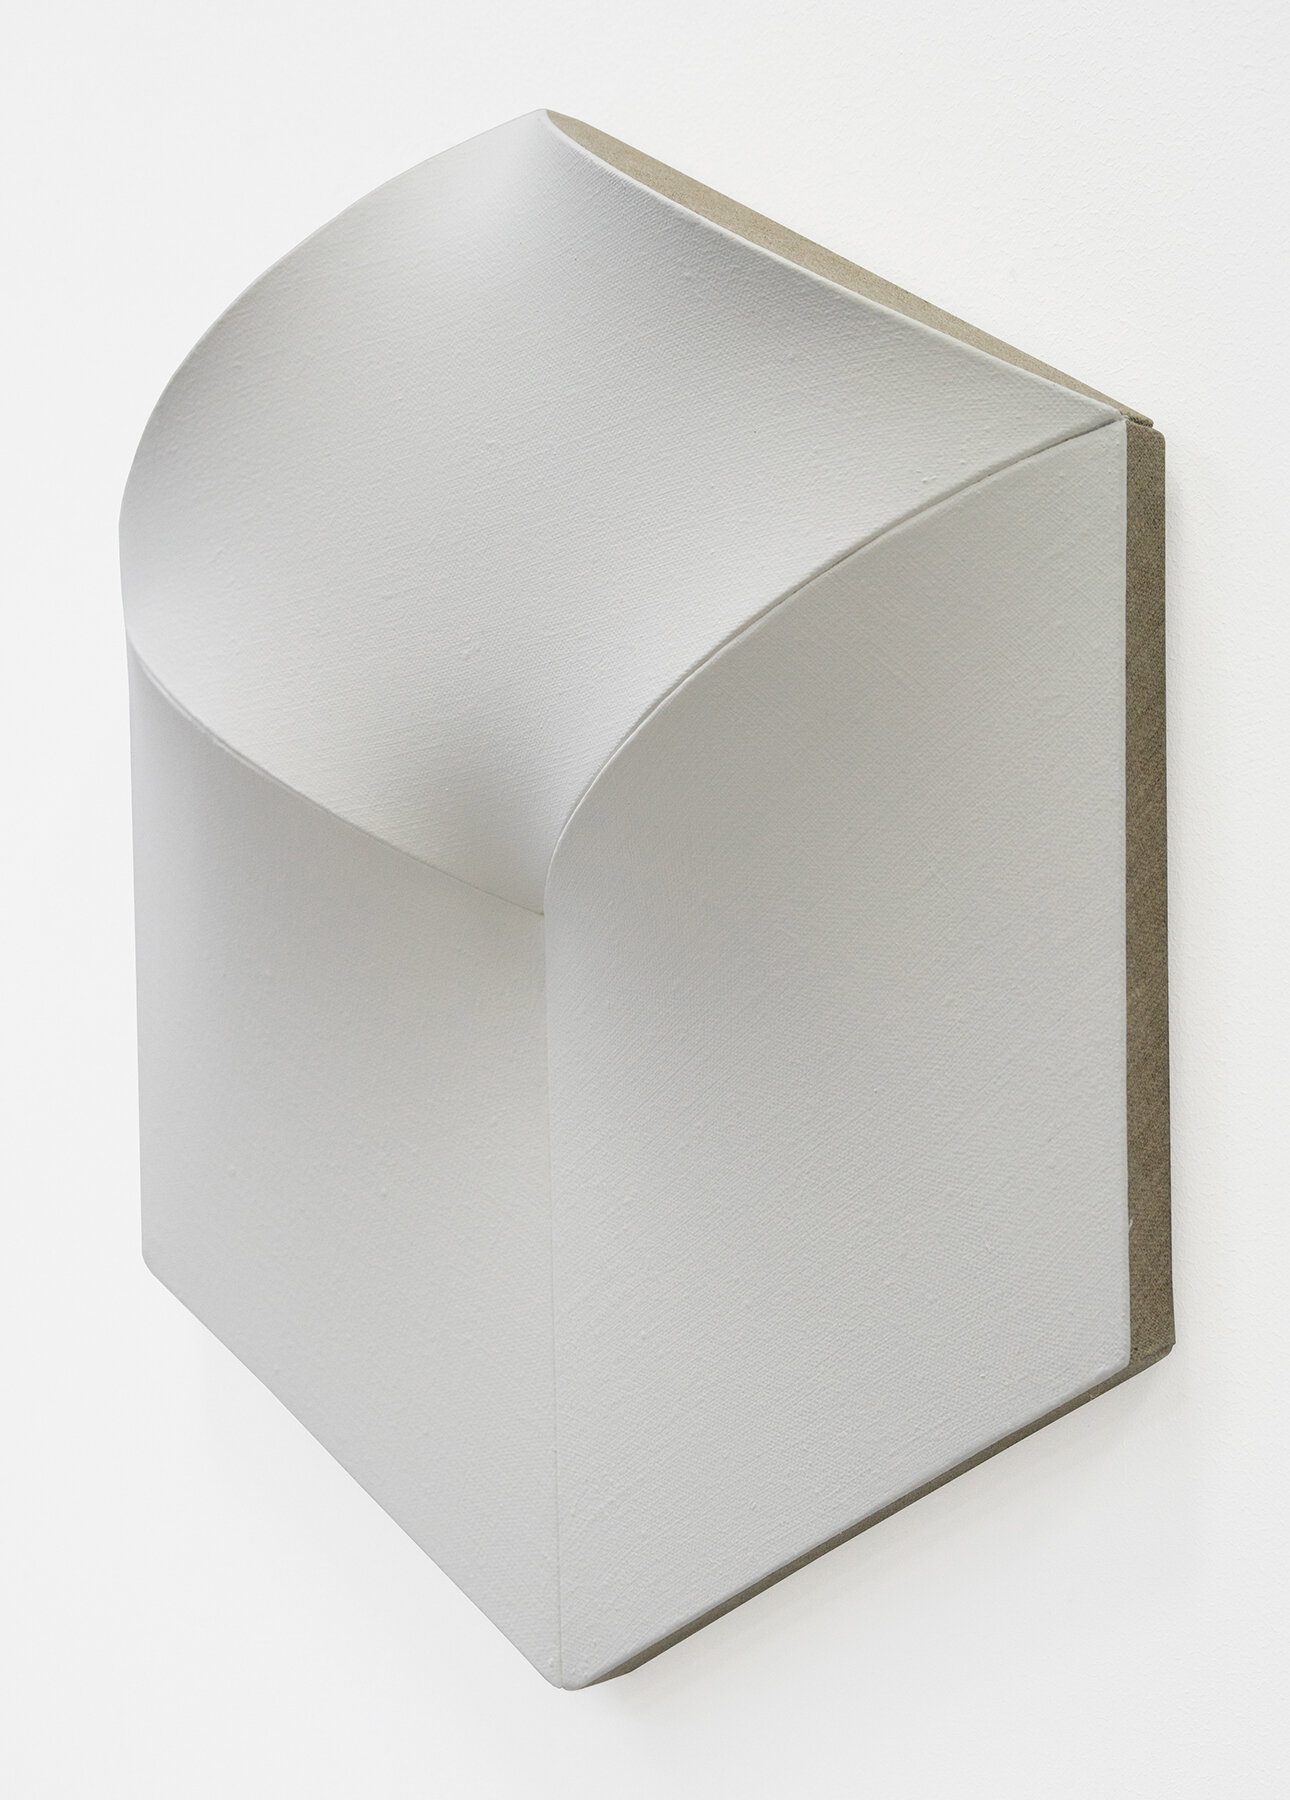 JAN MAARTEN VOSKUIL | Lozenge, circle, cube (side view), 13.75 x 13.75 x 2.5 inches / 35 x 35 x 6 cm, acrylics on linen, 2019